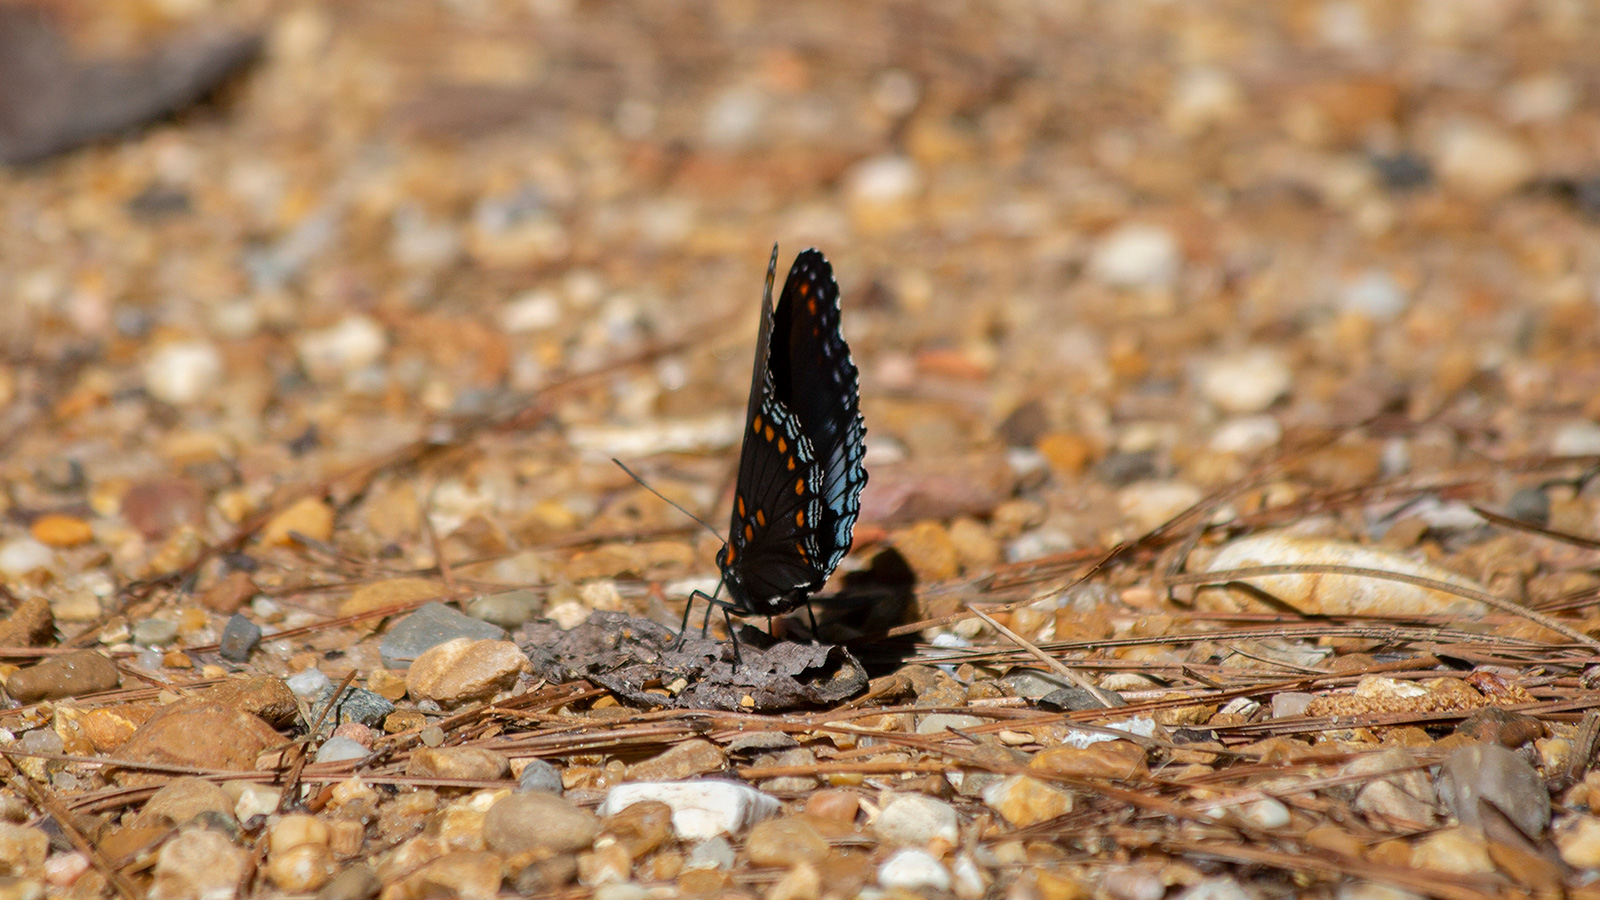 Red-spotted purple butterfly on a rocky dirt road